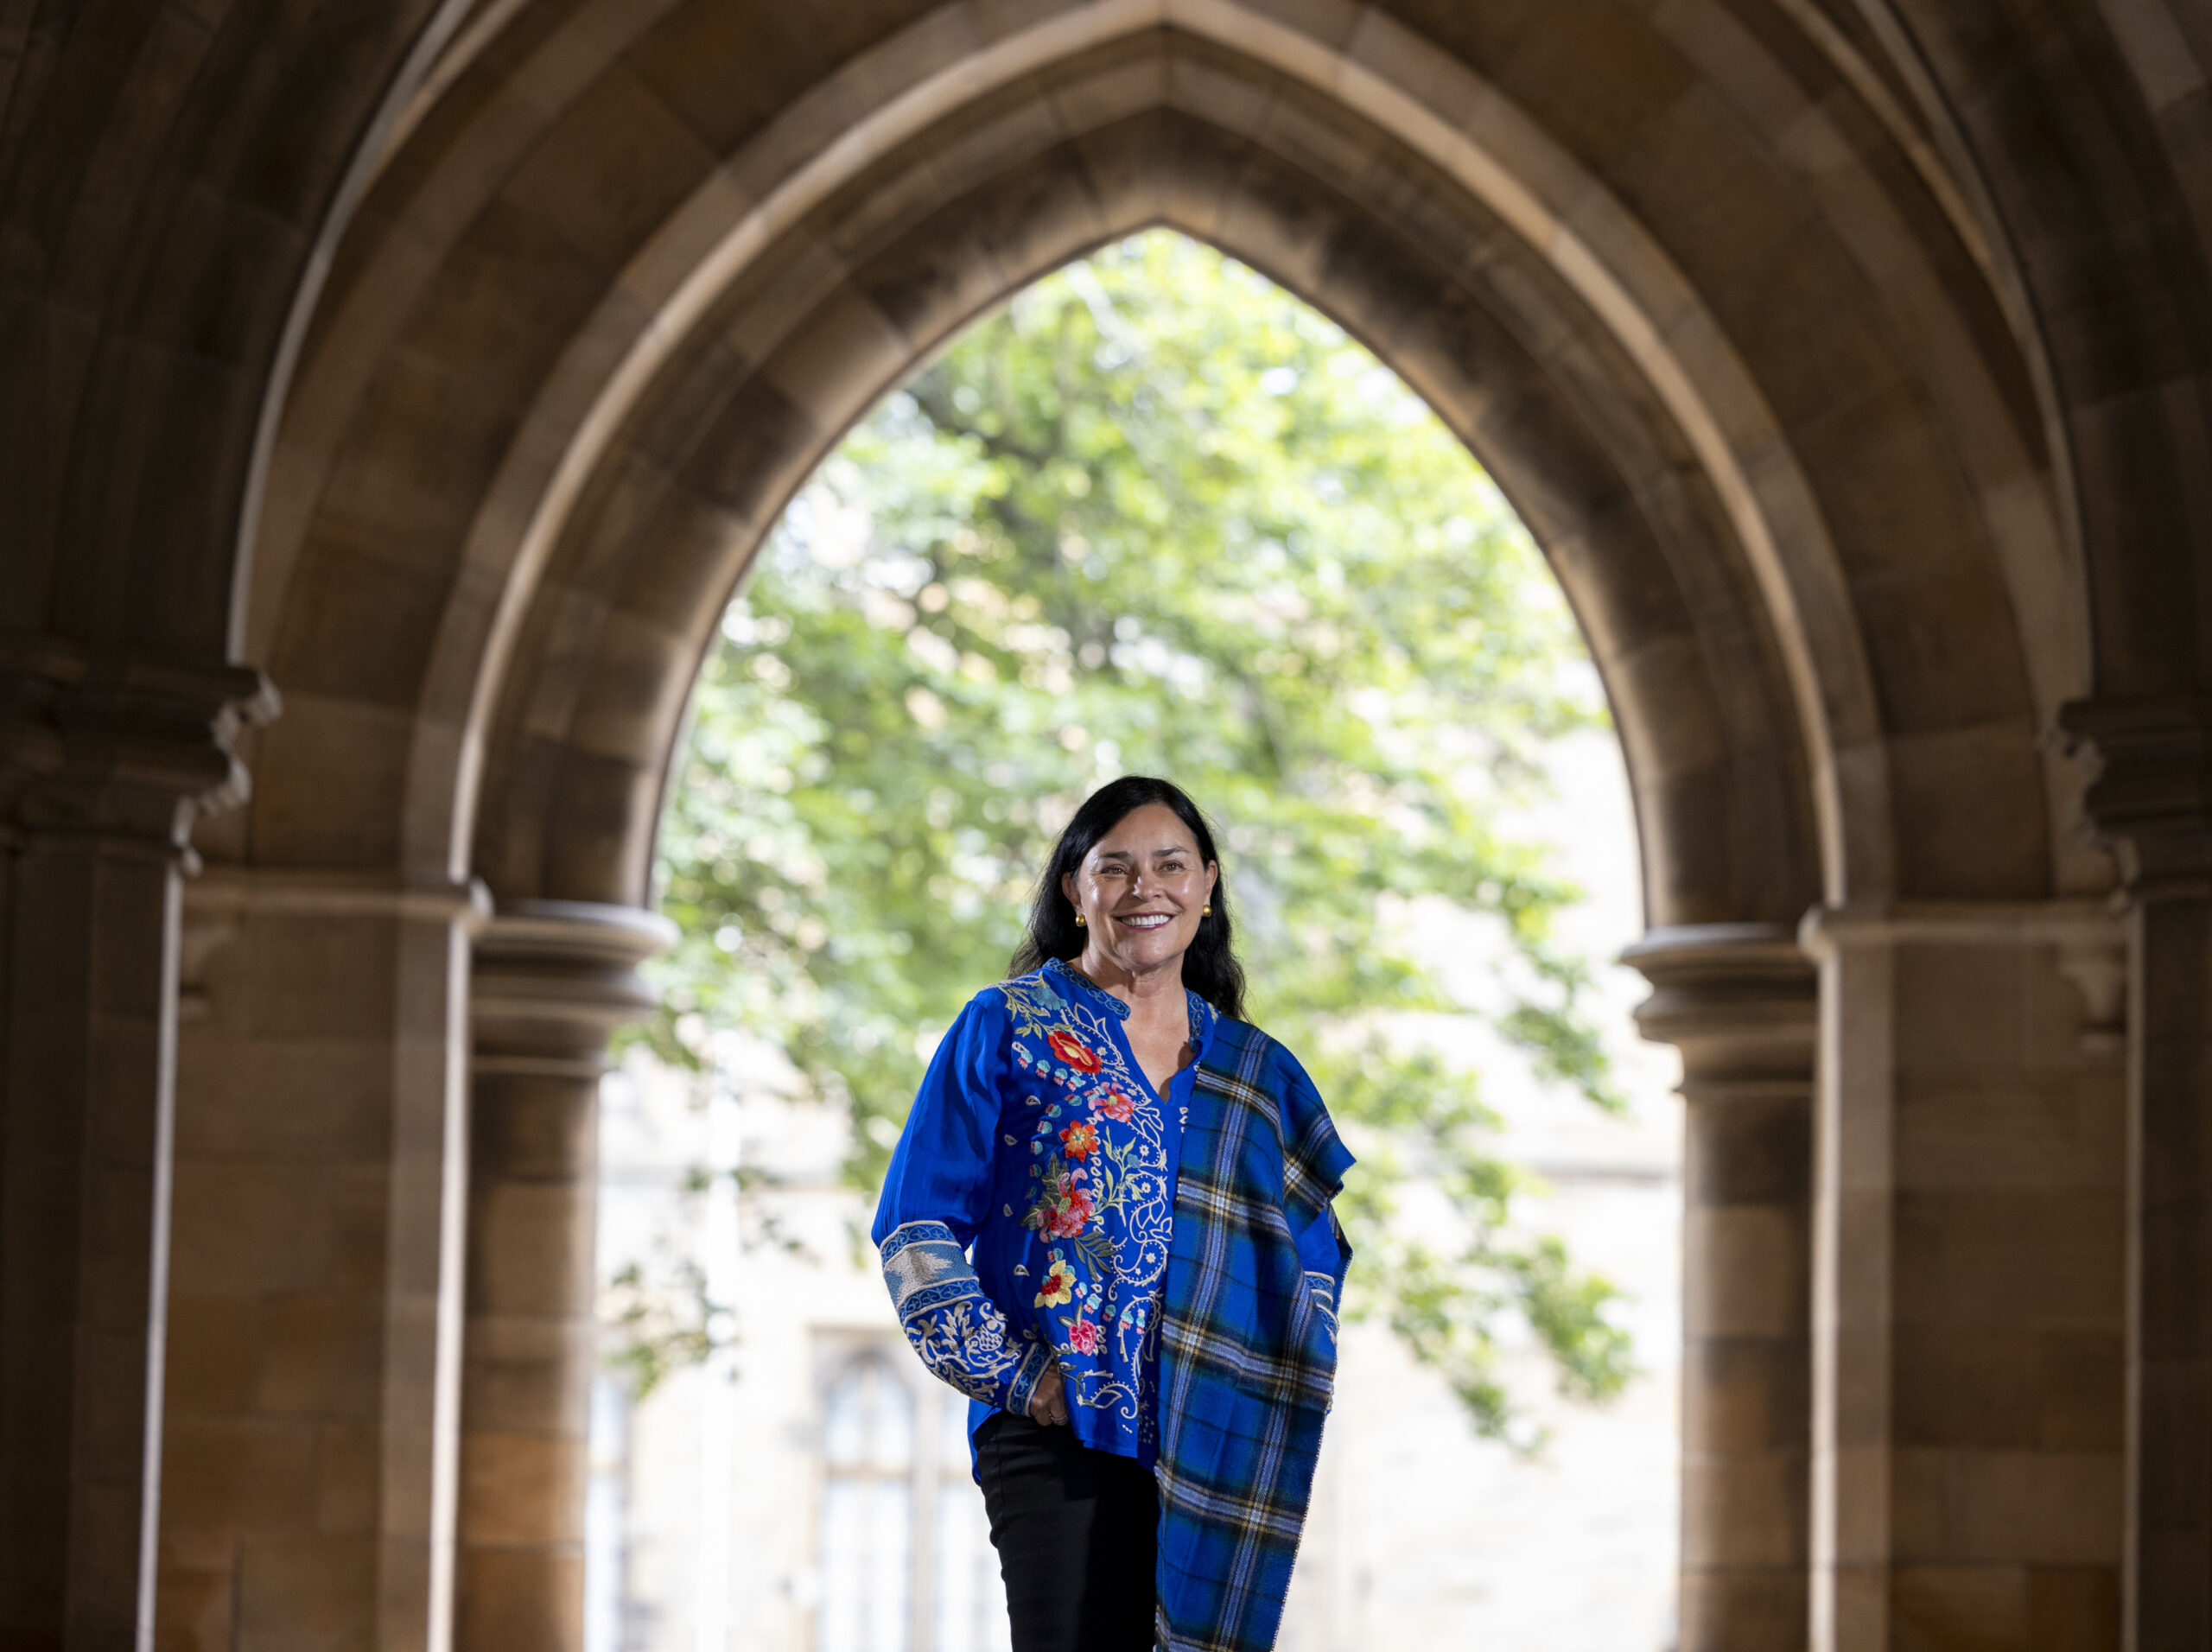 Outlander author Diana Gabaldon today in the cloisters  at the University of Glasgow. Credit: Martin Shields